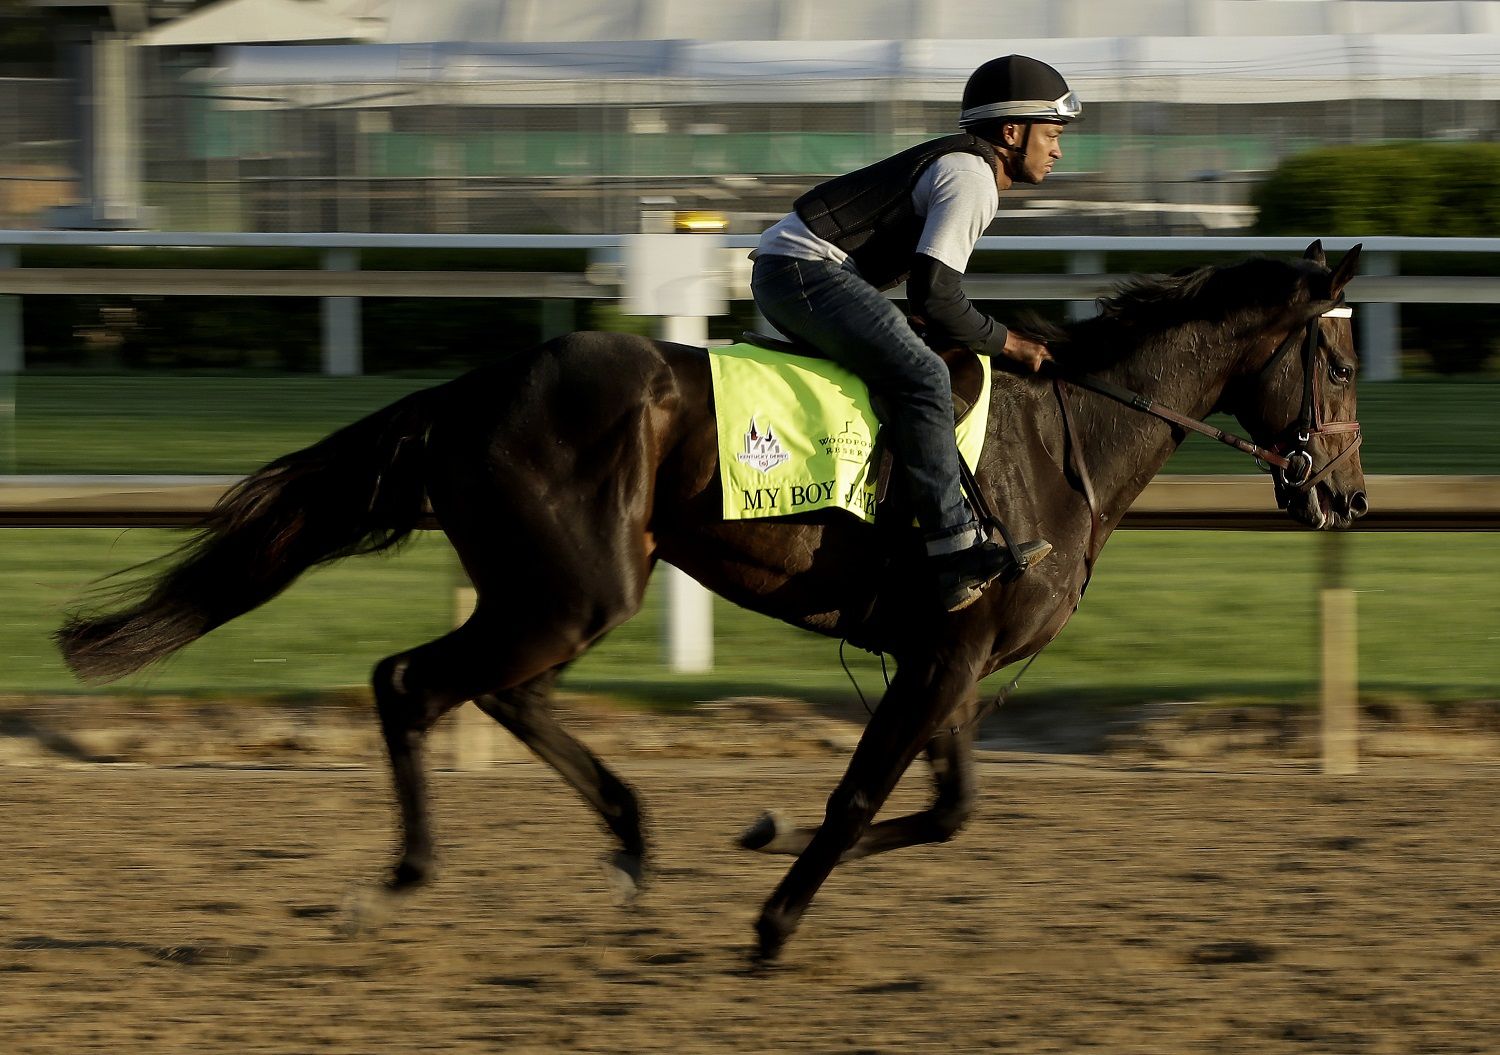 Kentucky Derby hopeful My Boy Jack runs during a morning workout at Churchill Downs Tuesday, May 1, 2018, in Louisville, Ky. The 144th running of the Kentucky Derby is scheduled for Saturday, May 5. (AP Photo/Charlie Riedel)